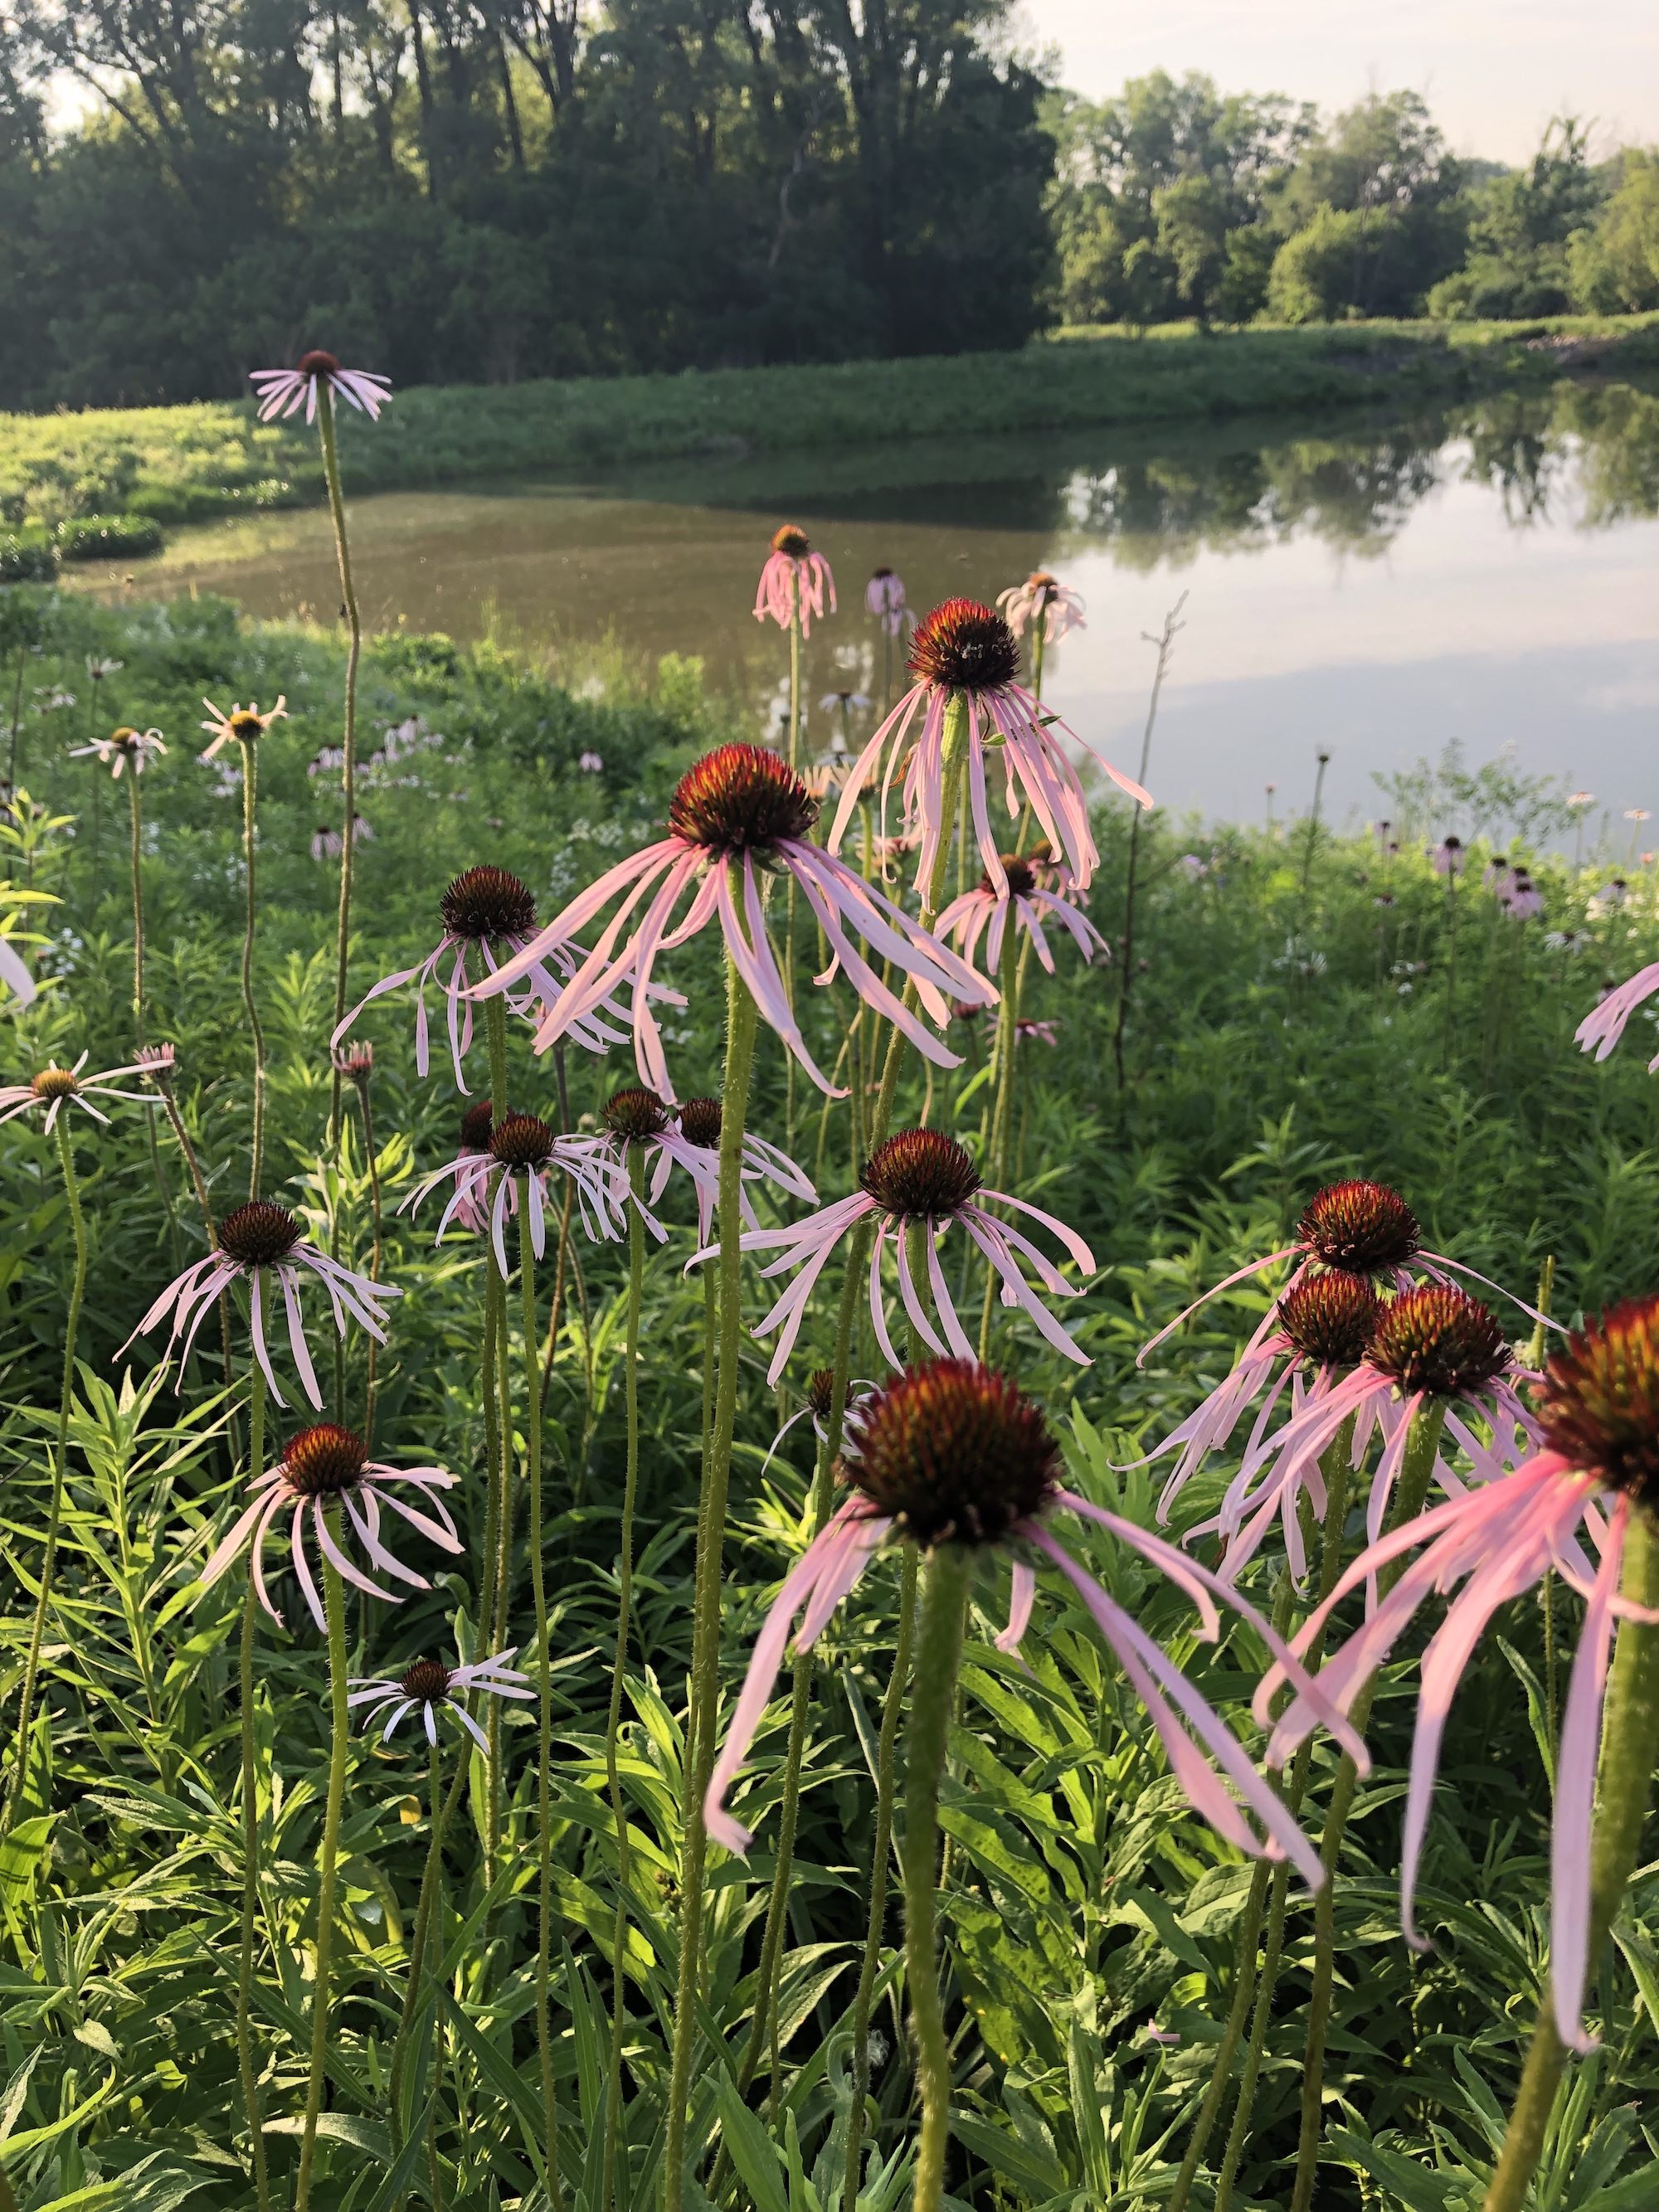 Pale purple coneflower on bank of Retaining Pond on corner of Nakoma Road and Manitou Way on June 12, 2021.